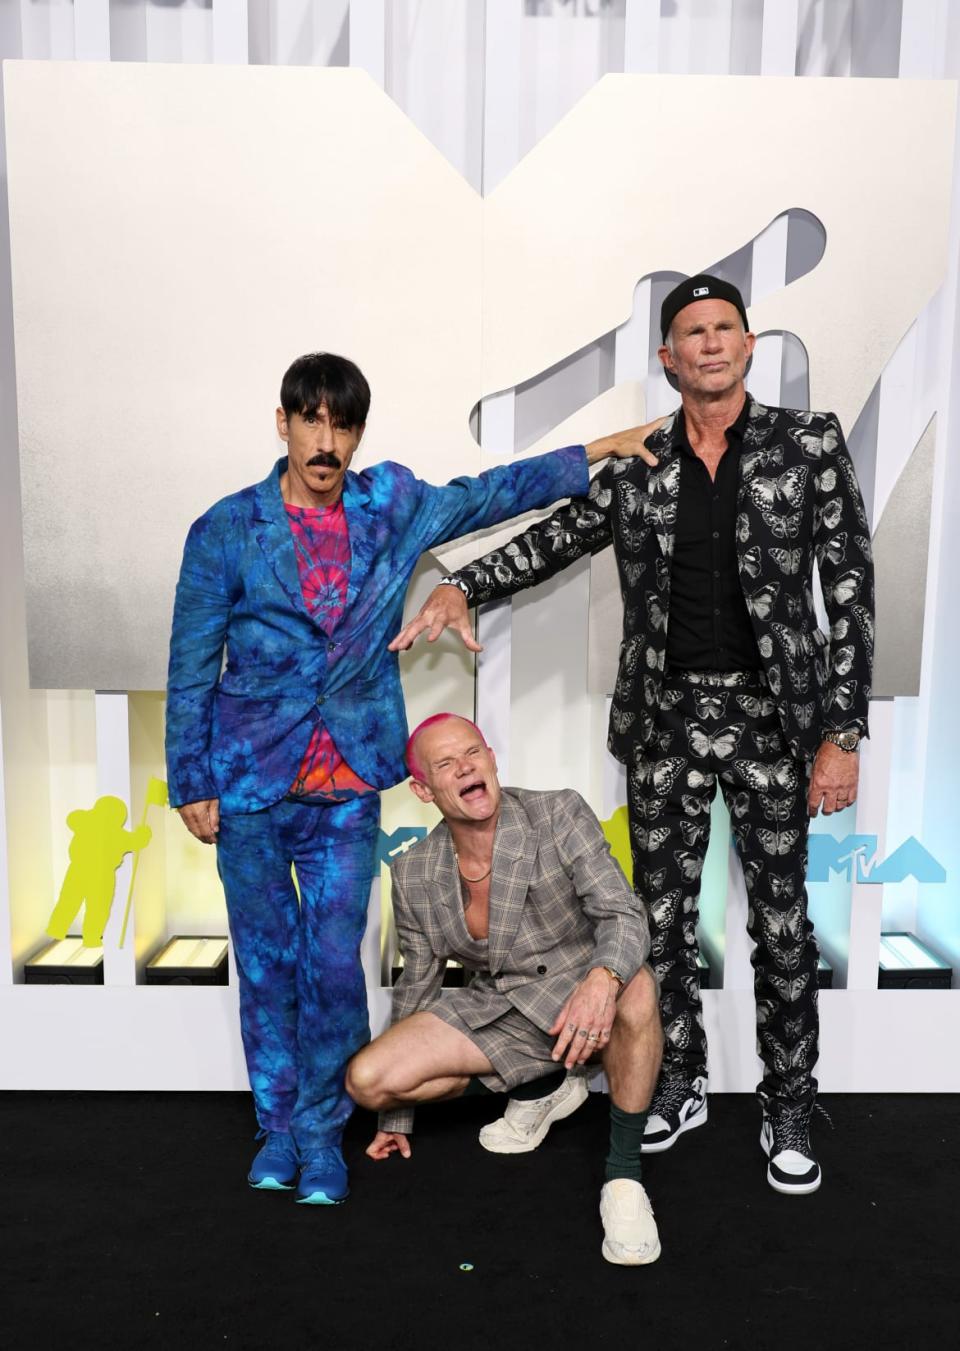 <div class="inline-image__title">Red Hot Chili Peppers</div> <div class="inline-image__caption"><p>Red Hot Chili Peppers show excellent red carpet artistry. Adore them.</p></div> <div class="inline-image__credit">Dia Dipasupil/Getty</div>